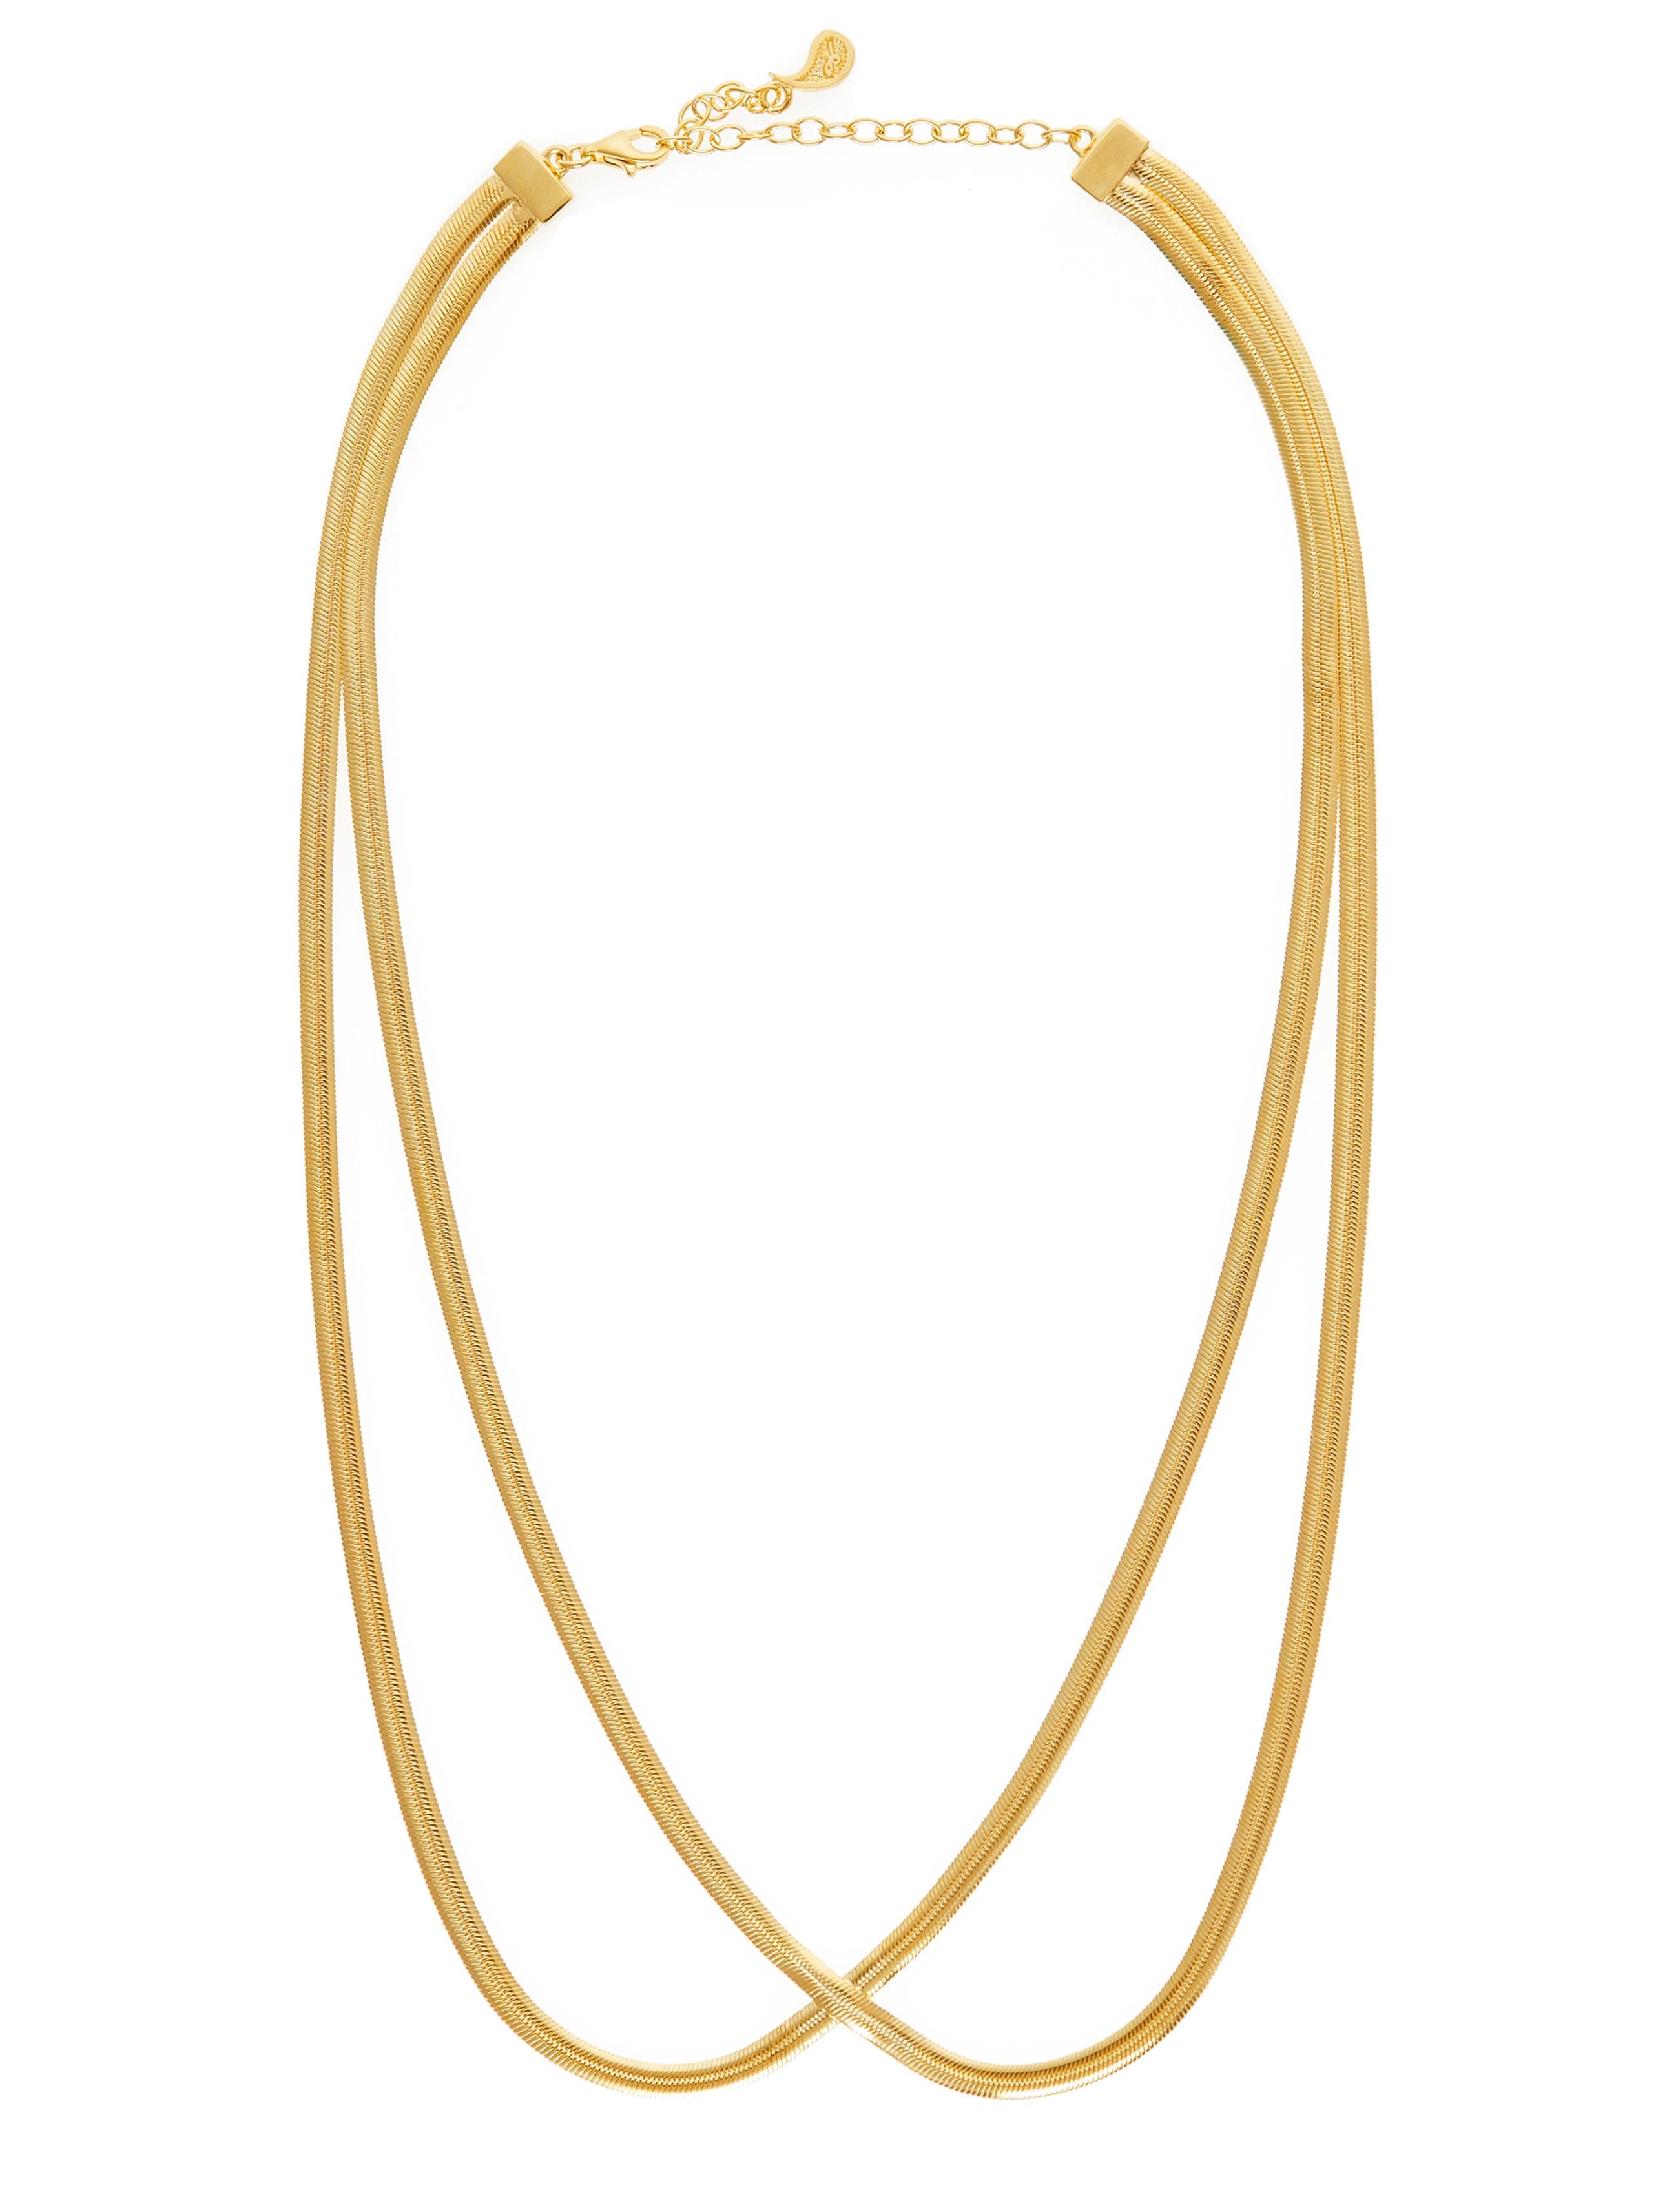 NATARAJ NECKLACE 

A statement piece that melts on your collar bones and follows the shapes and curves of your decolletage. The Nataraj consists of two yellow gold flat snake chains that connect in a single point of the front of the necklace and